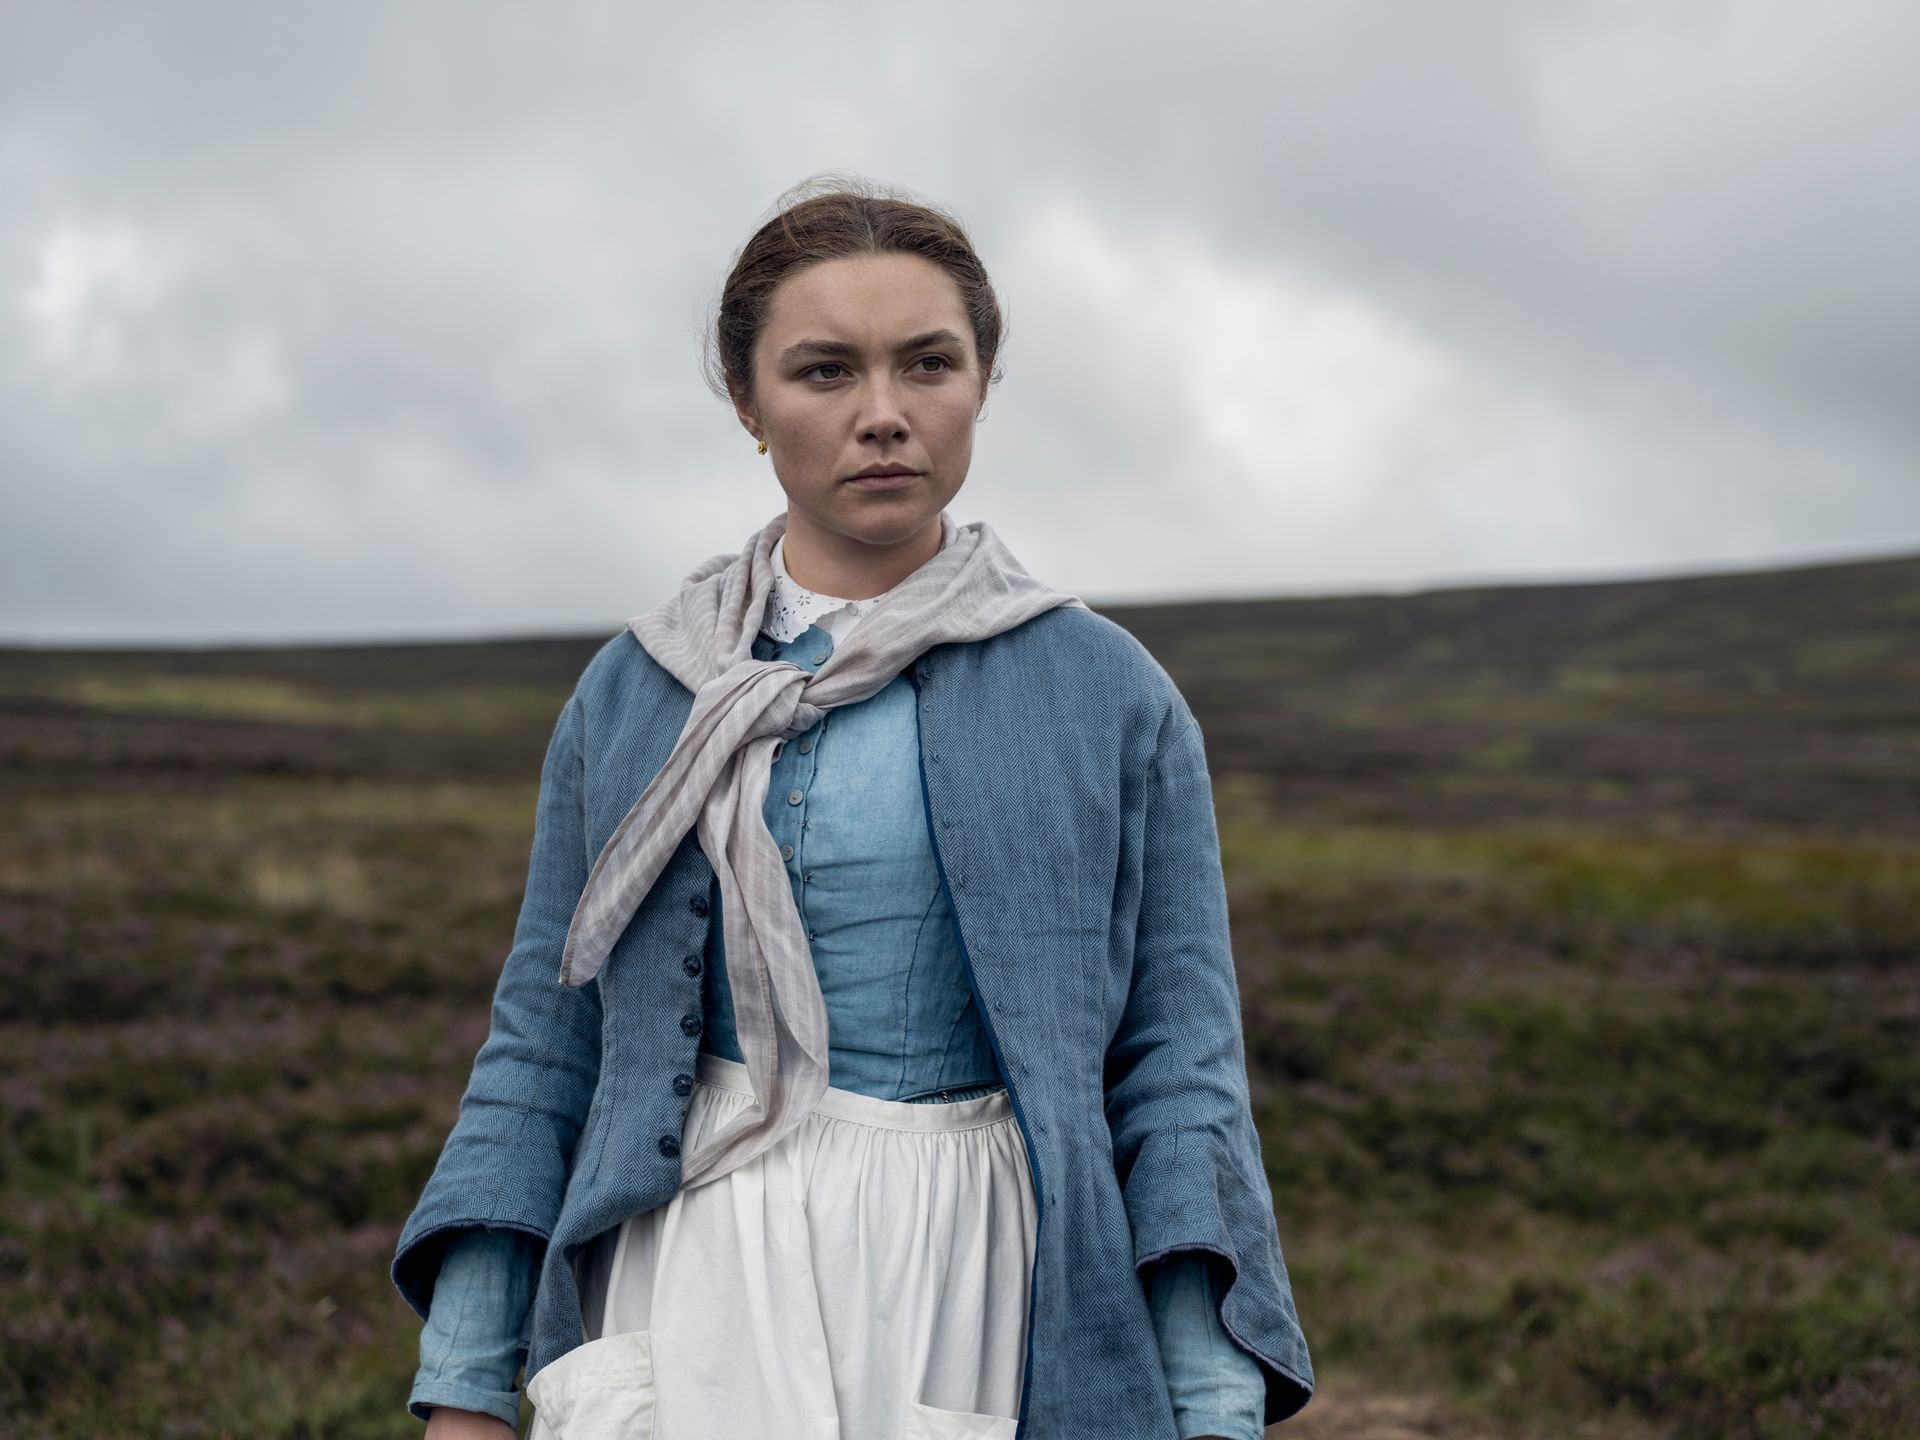 A nurse (Florence Pugh) in a blue and white dress with a white scarf standing in a low field of grace with a gray sky overhead.